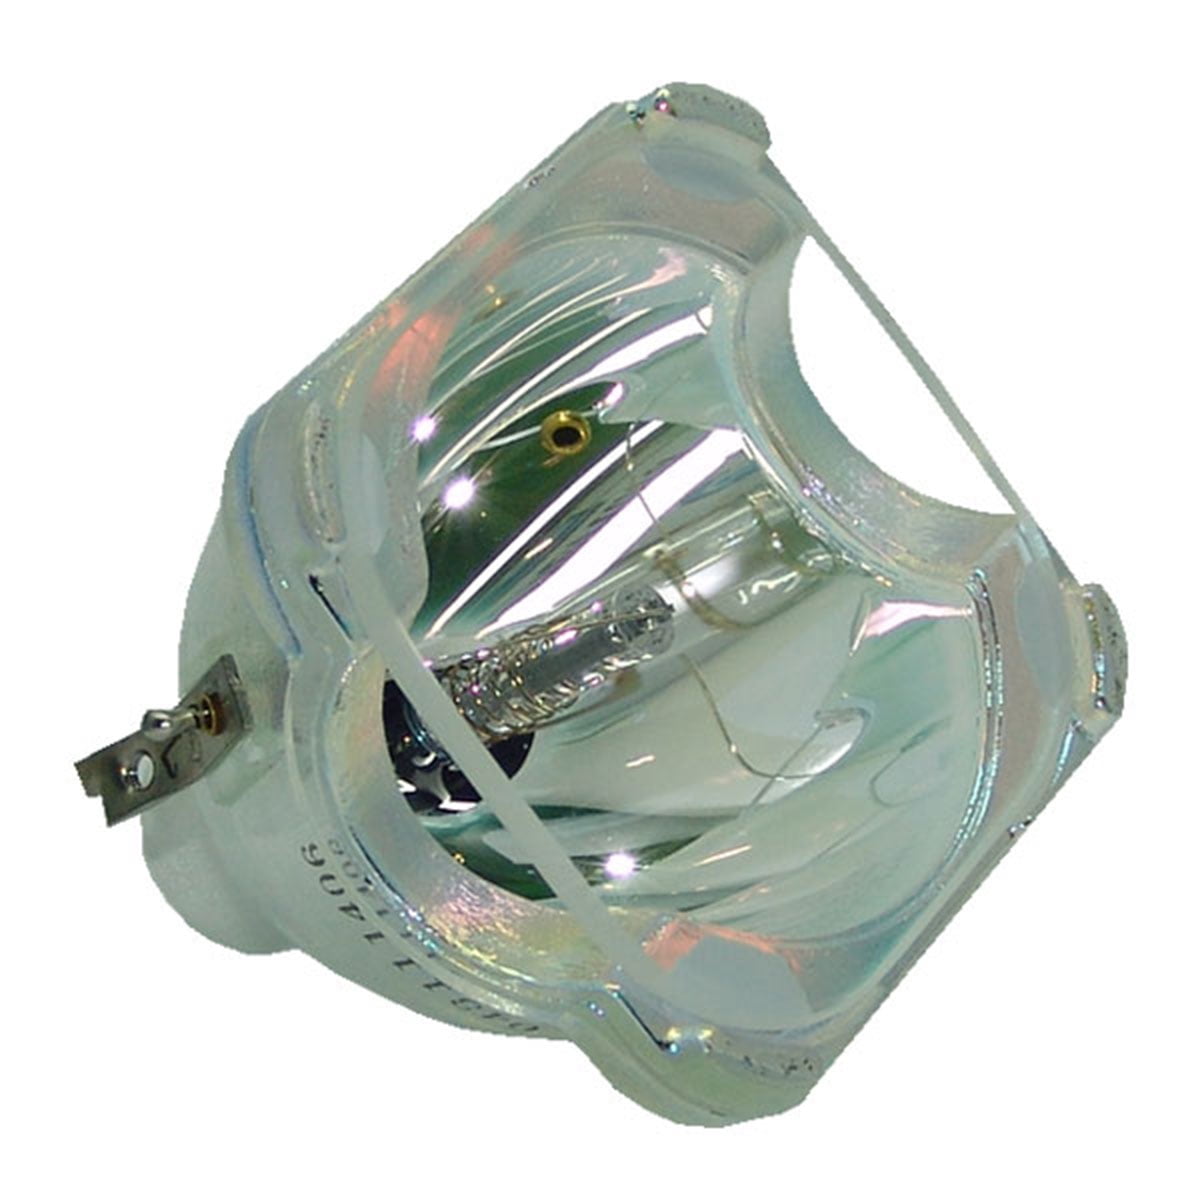 Lutema Economy for Mitsubishi WD-92A12 TV Lamp Bulb Only 